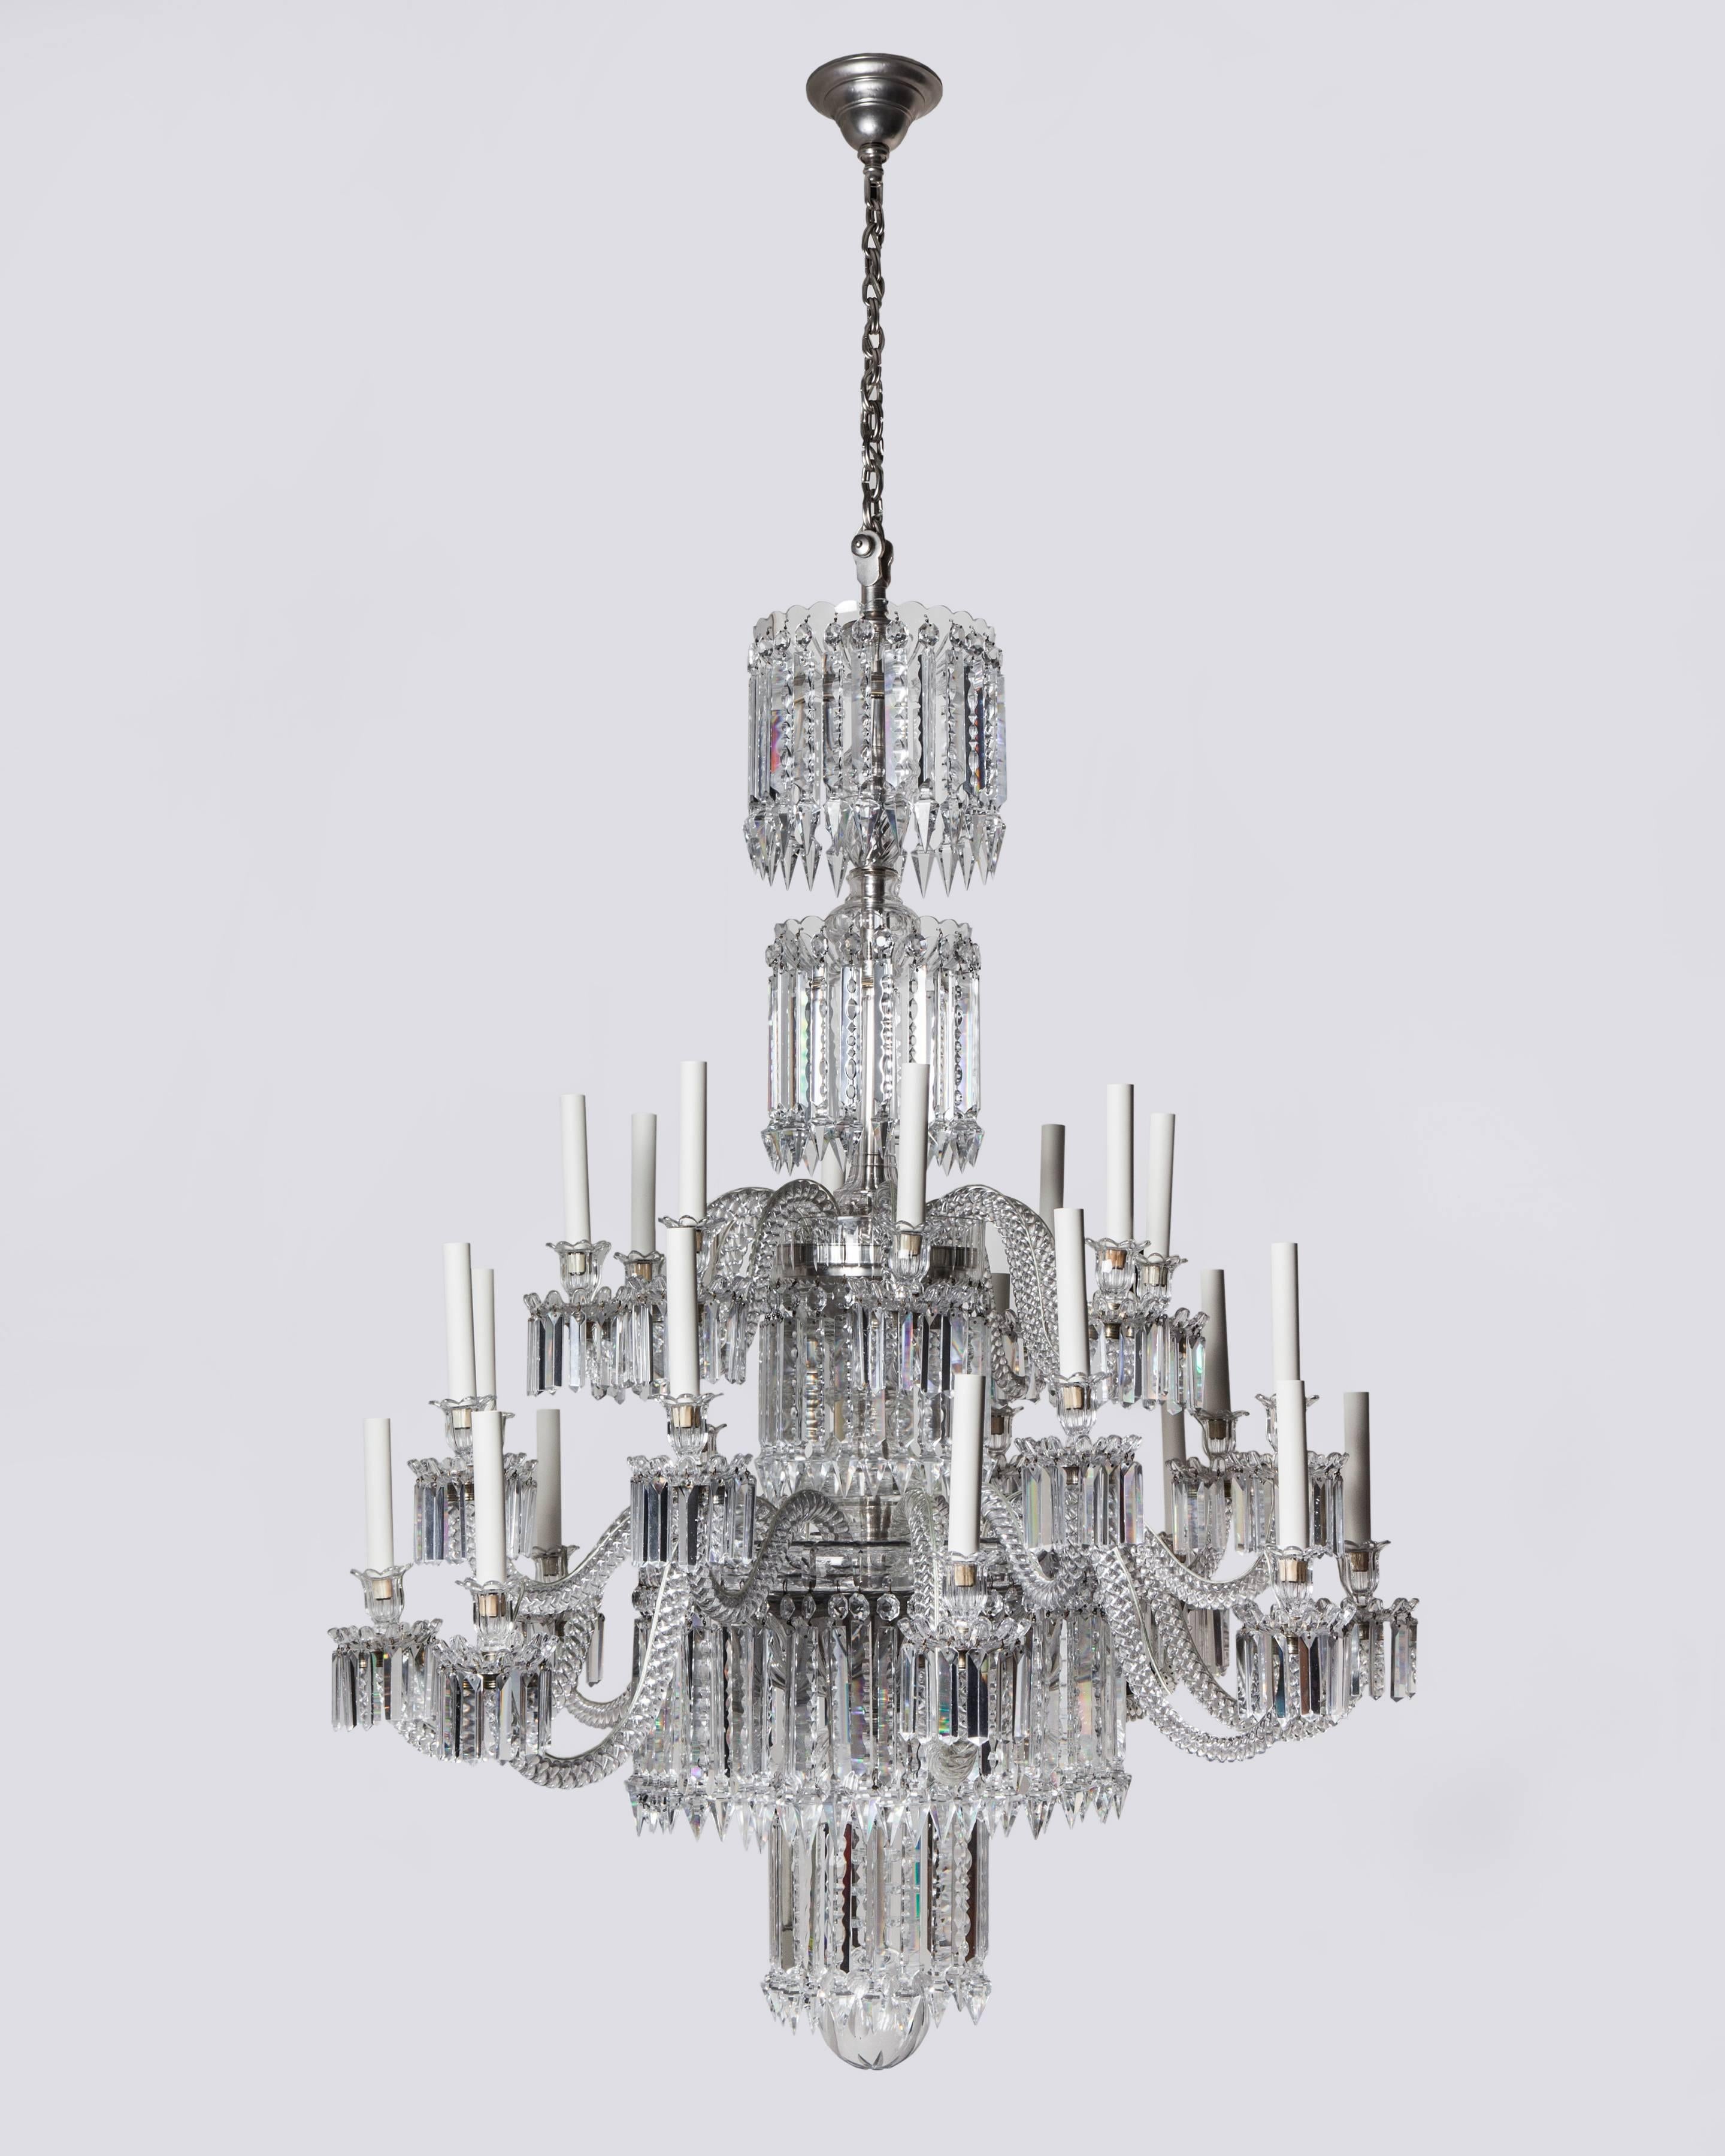 AHL3960

A twenty-four light crystal chandelier having two tiers of alternating height arms issuing from a waterfall-form body with silverplate mounts. The whole is brilliantly cut and dressed. Attributed to the French maker Baccarat. Due to the